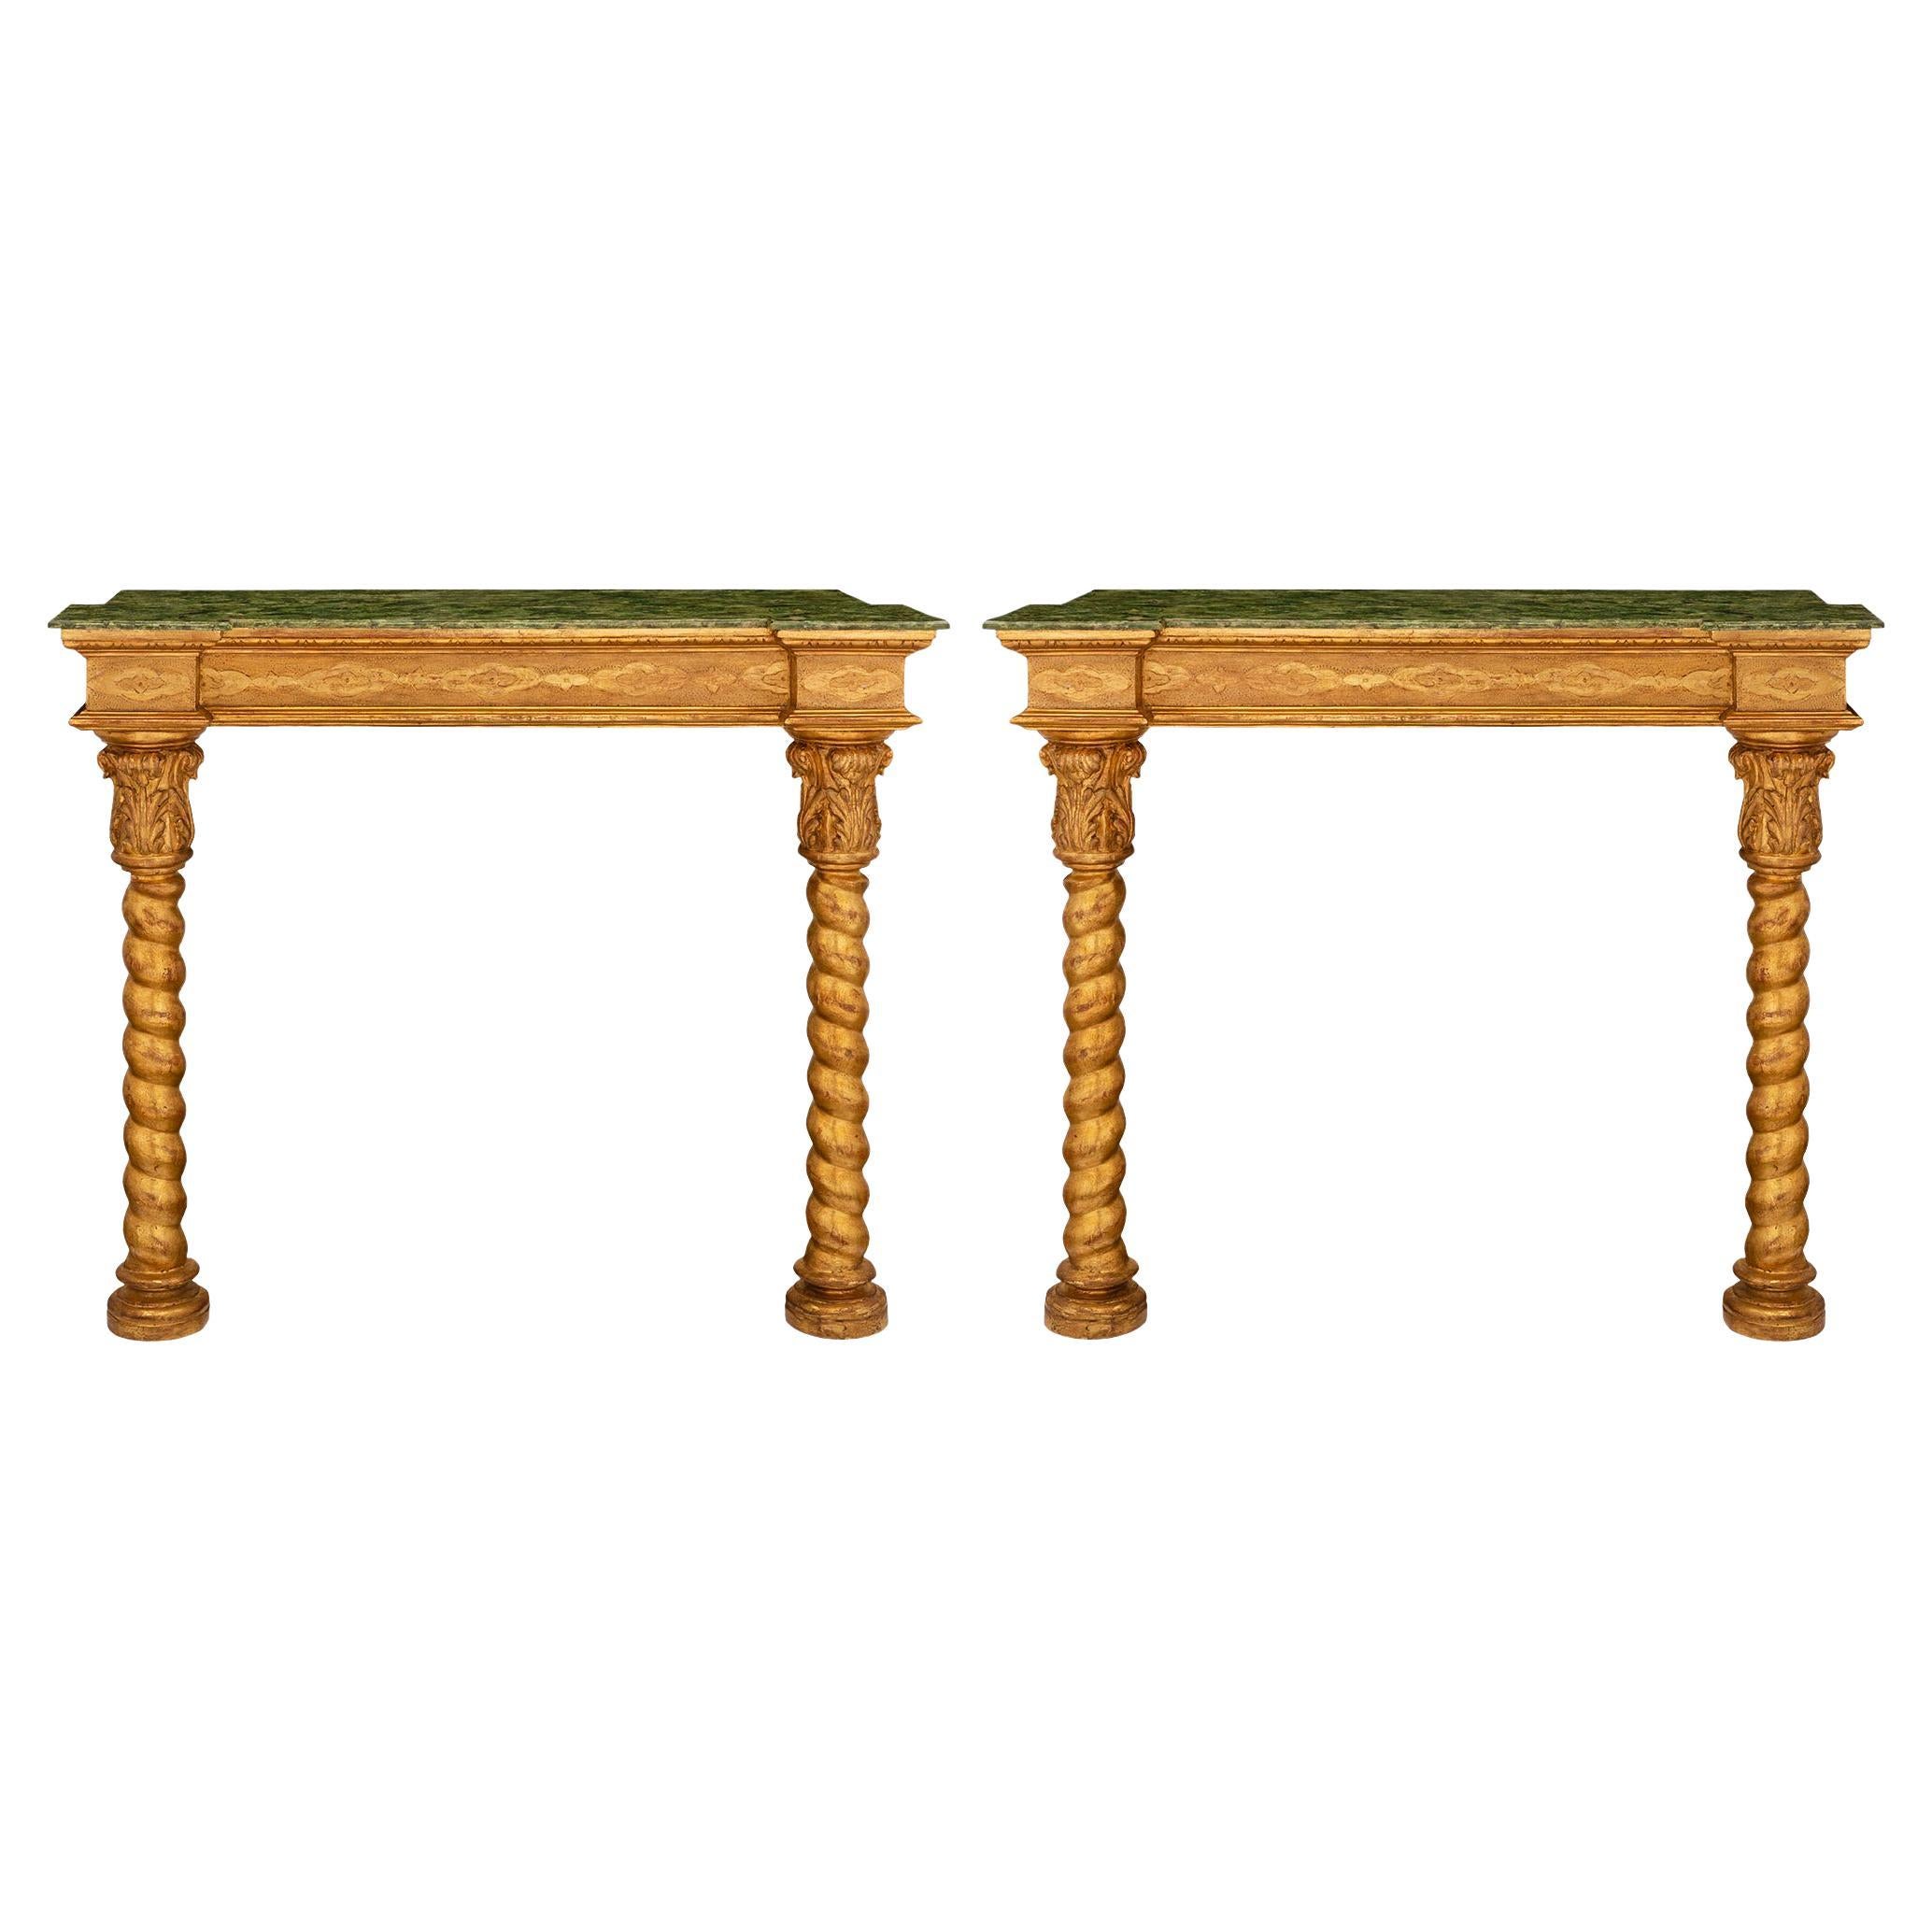 Pair of Early 19th Century Louis XIII Style Giltwood Consoles